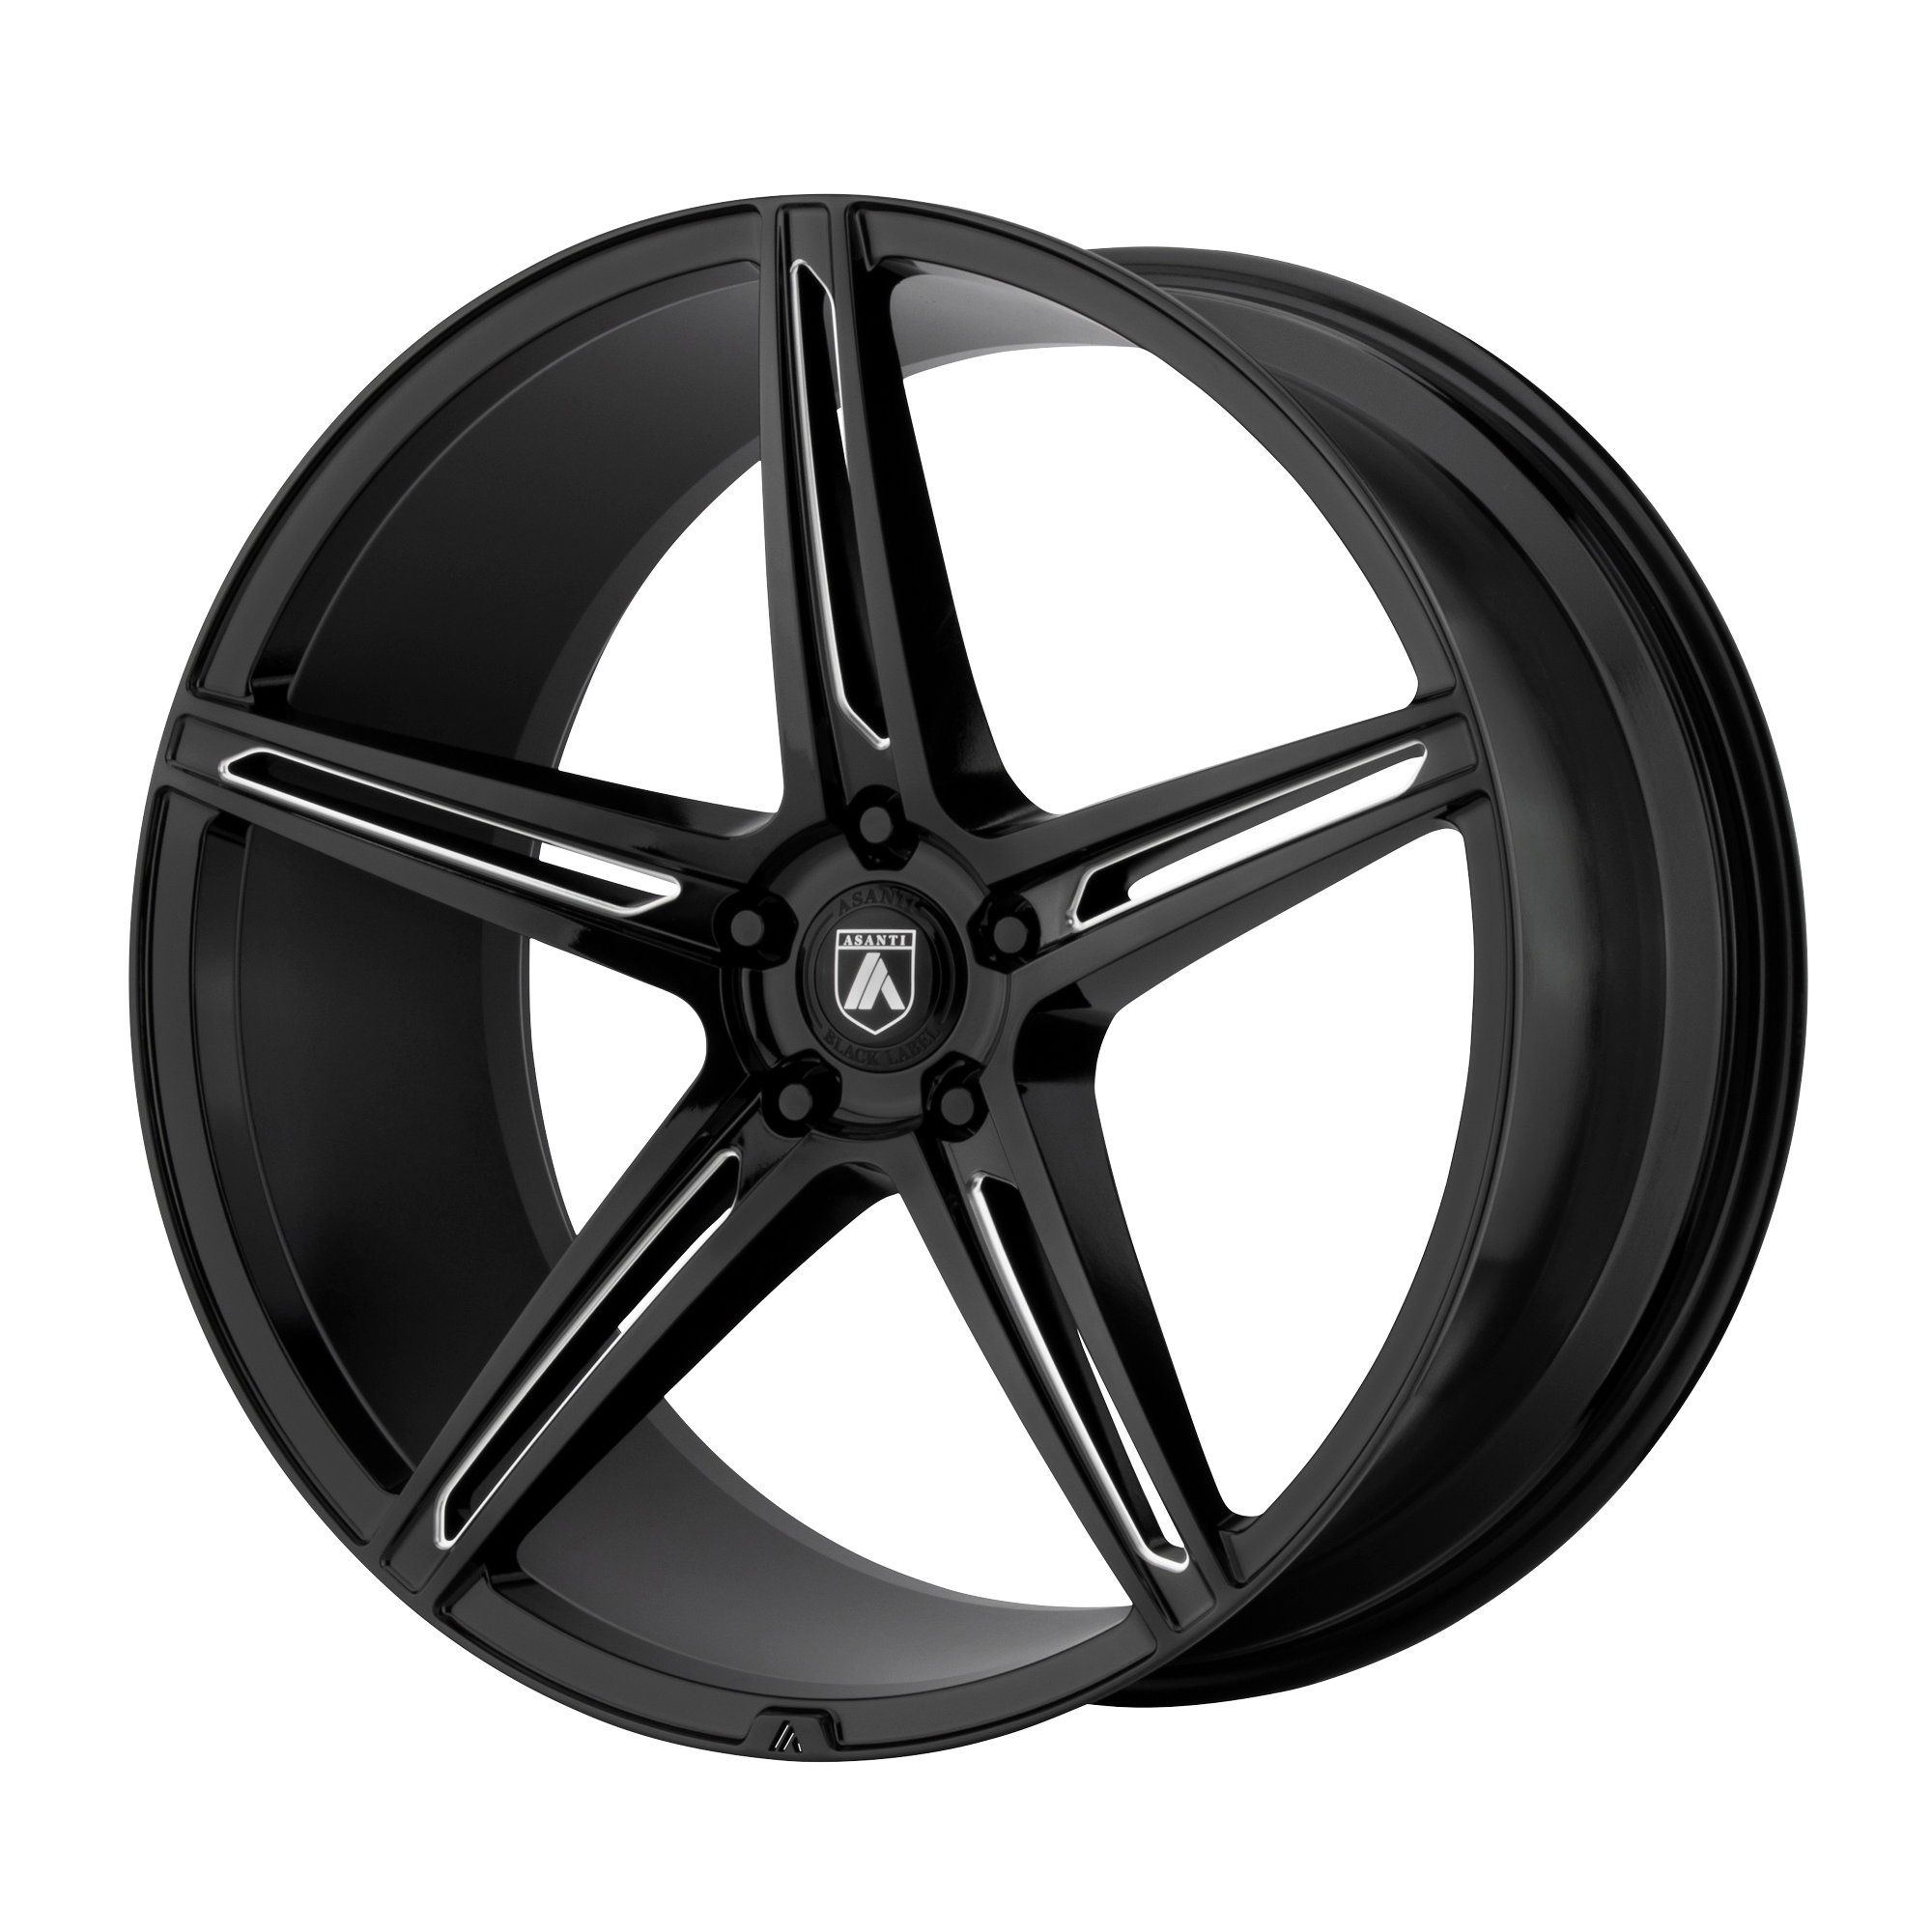 ALPHA 5 20x8.5 5x114.30 GLOSS BLACK MILLED (38 mm) - Tires and Engine Performance